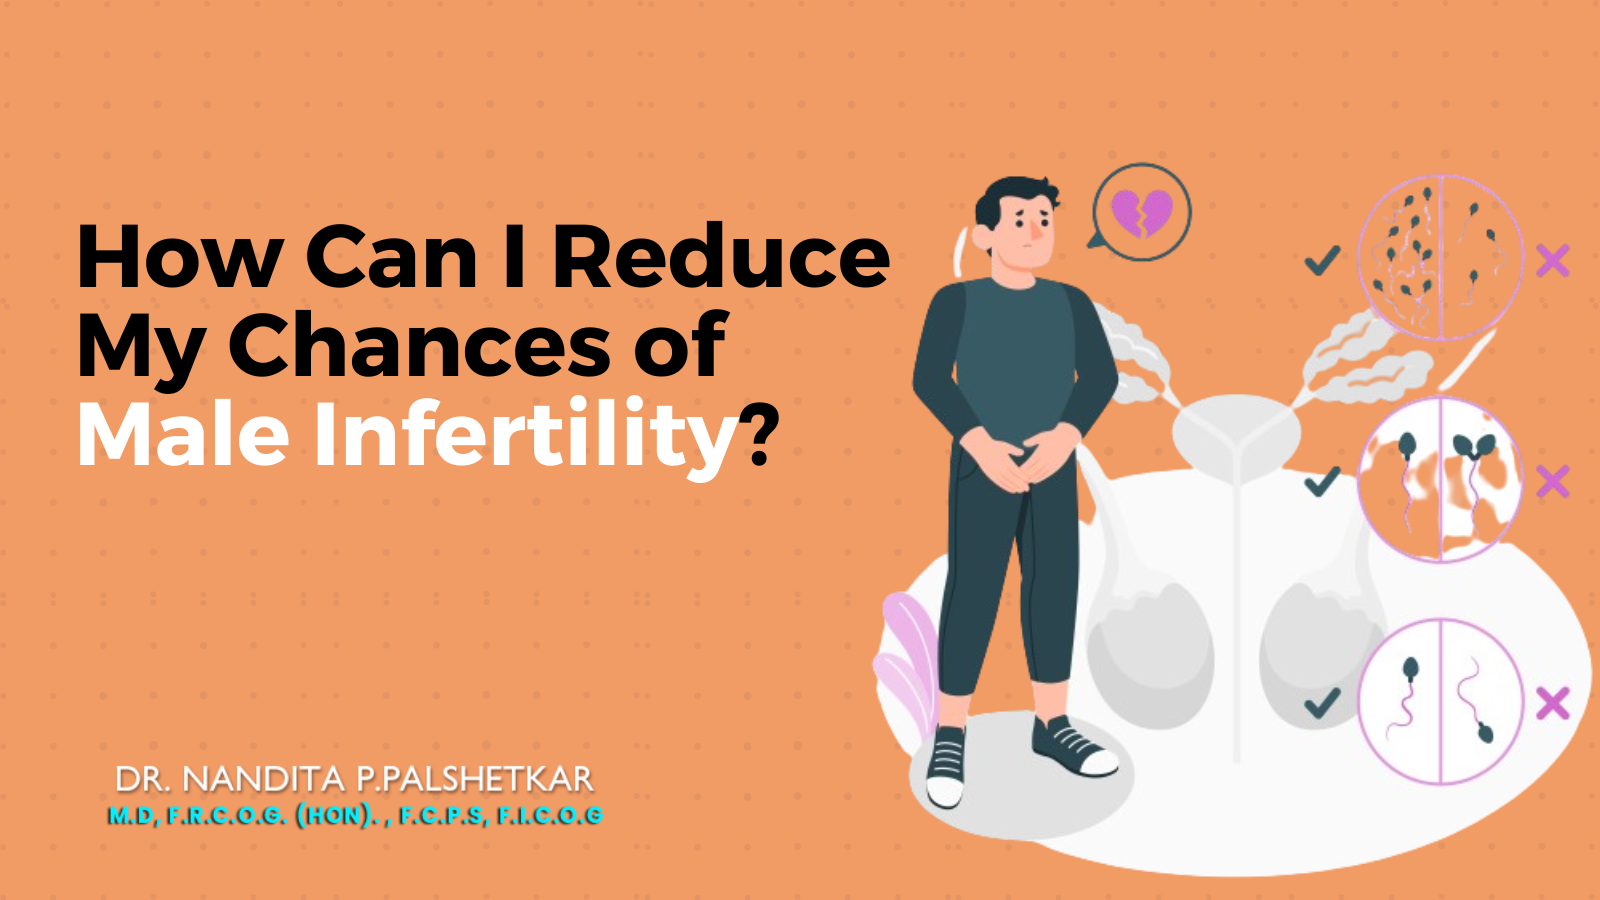 How Can I Reduce My Chances of Male Infertility?